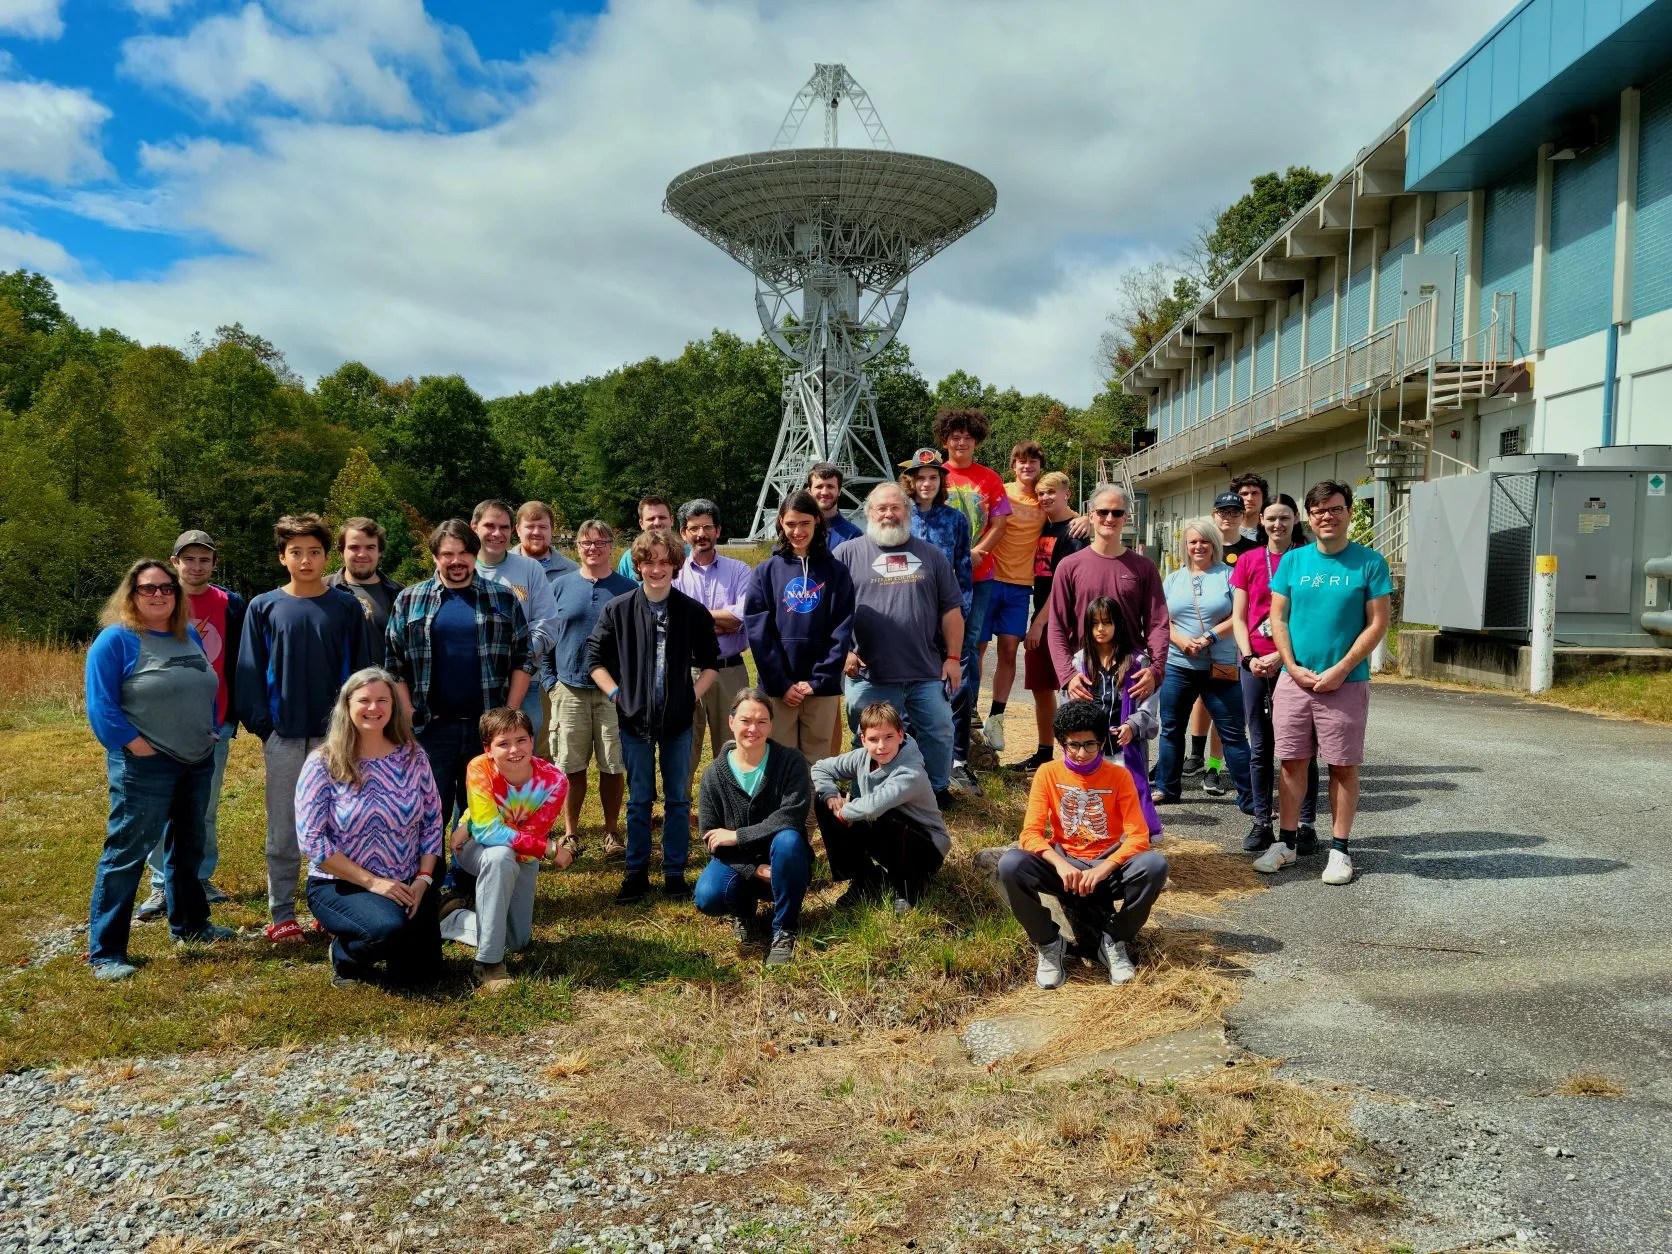 A group photo of Space Apps participants at PARI in front of one of the observatory’s radio telescopes.